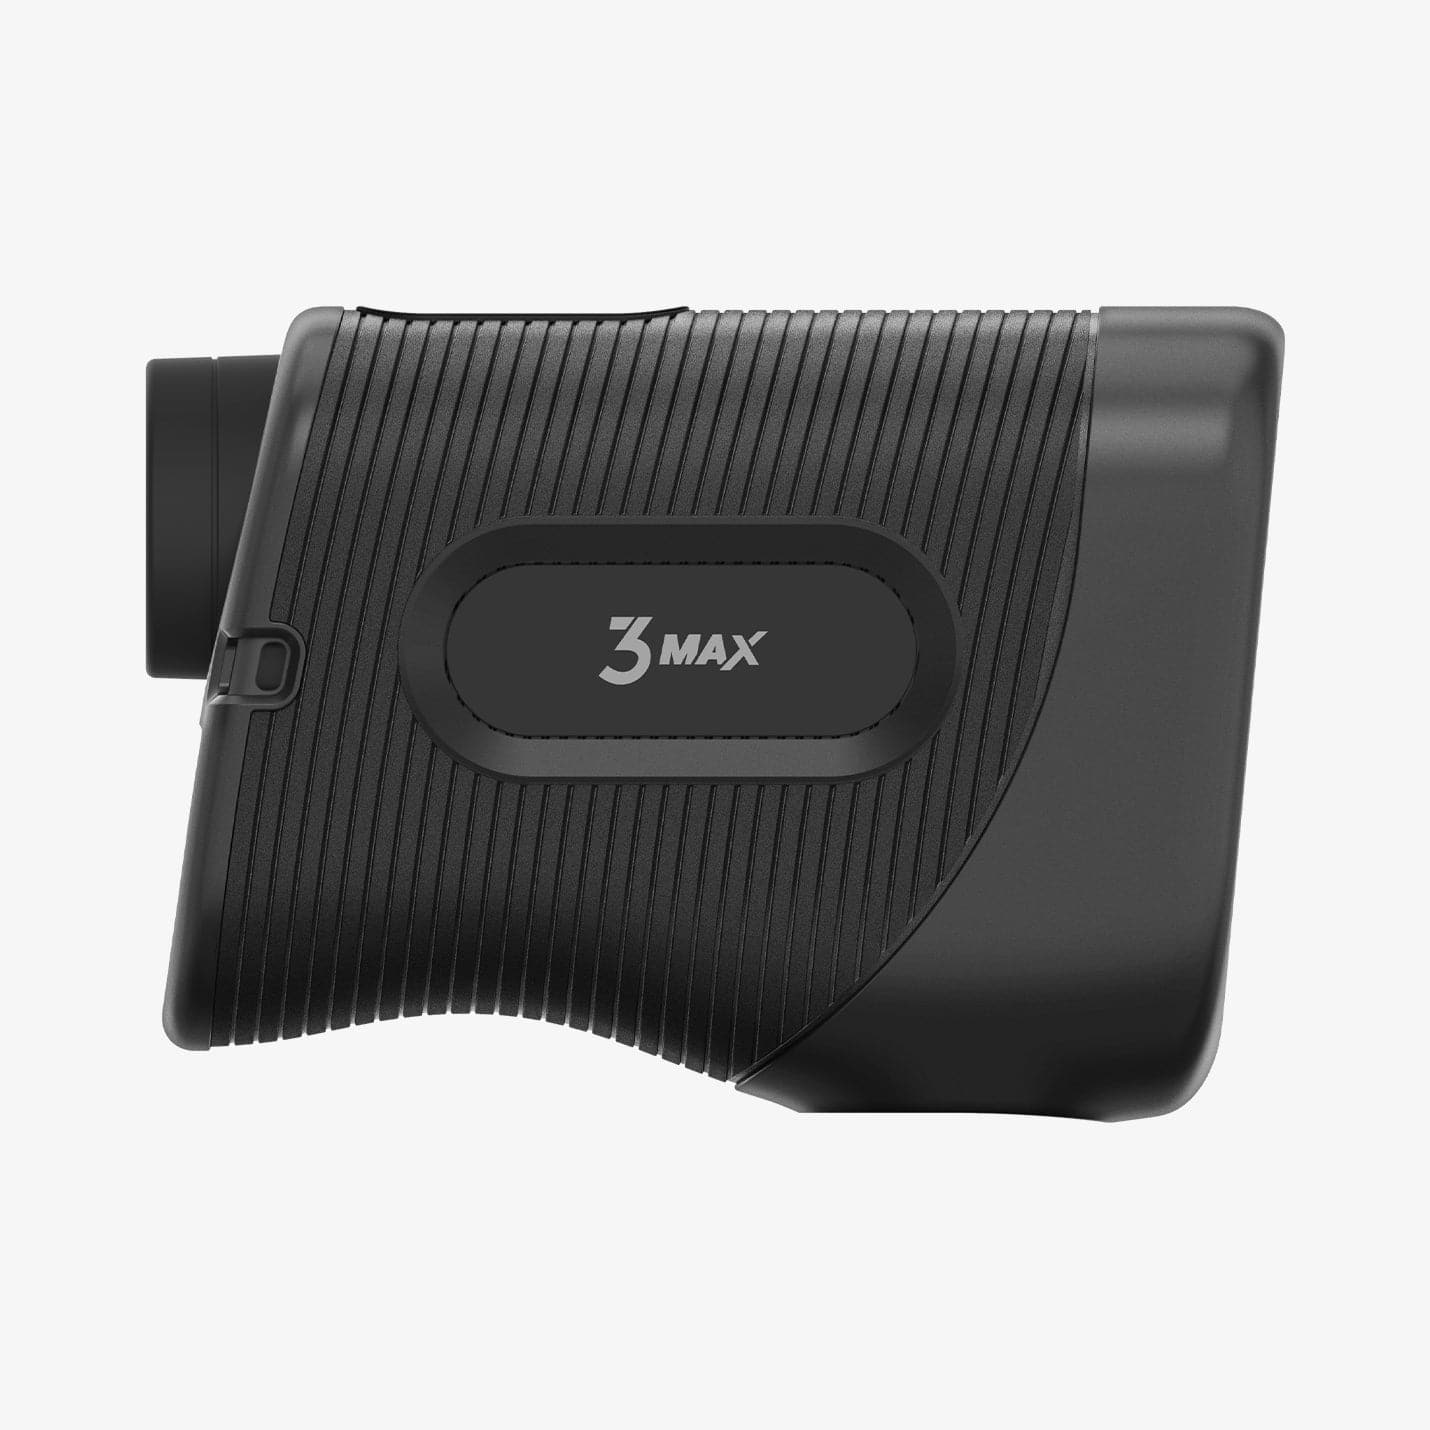 ACS05191 - Blue Tees Golf Series 3 Max Rangefinder AirTag Case Silicone Fit in black showing the side